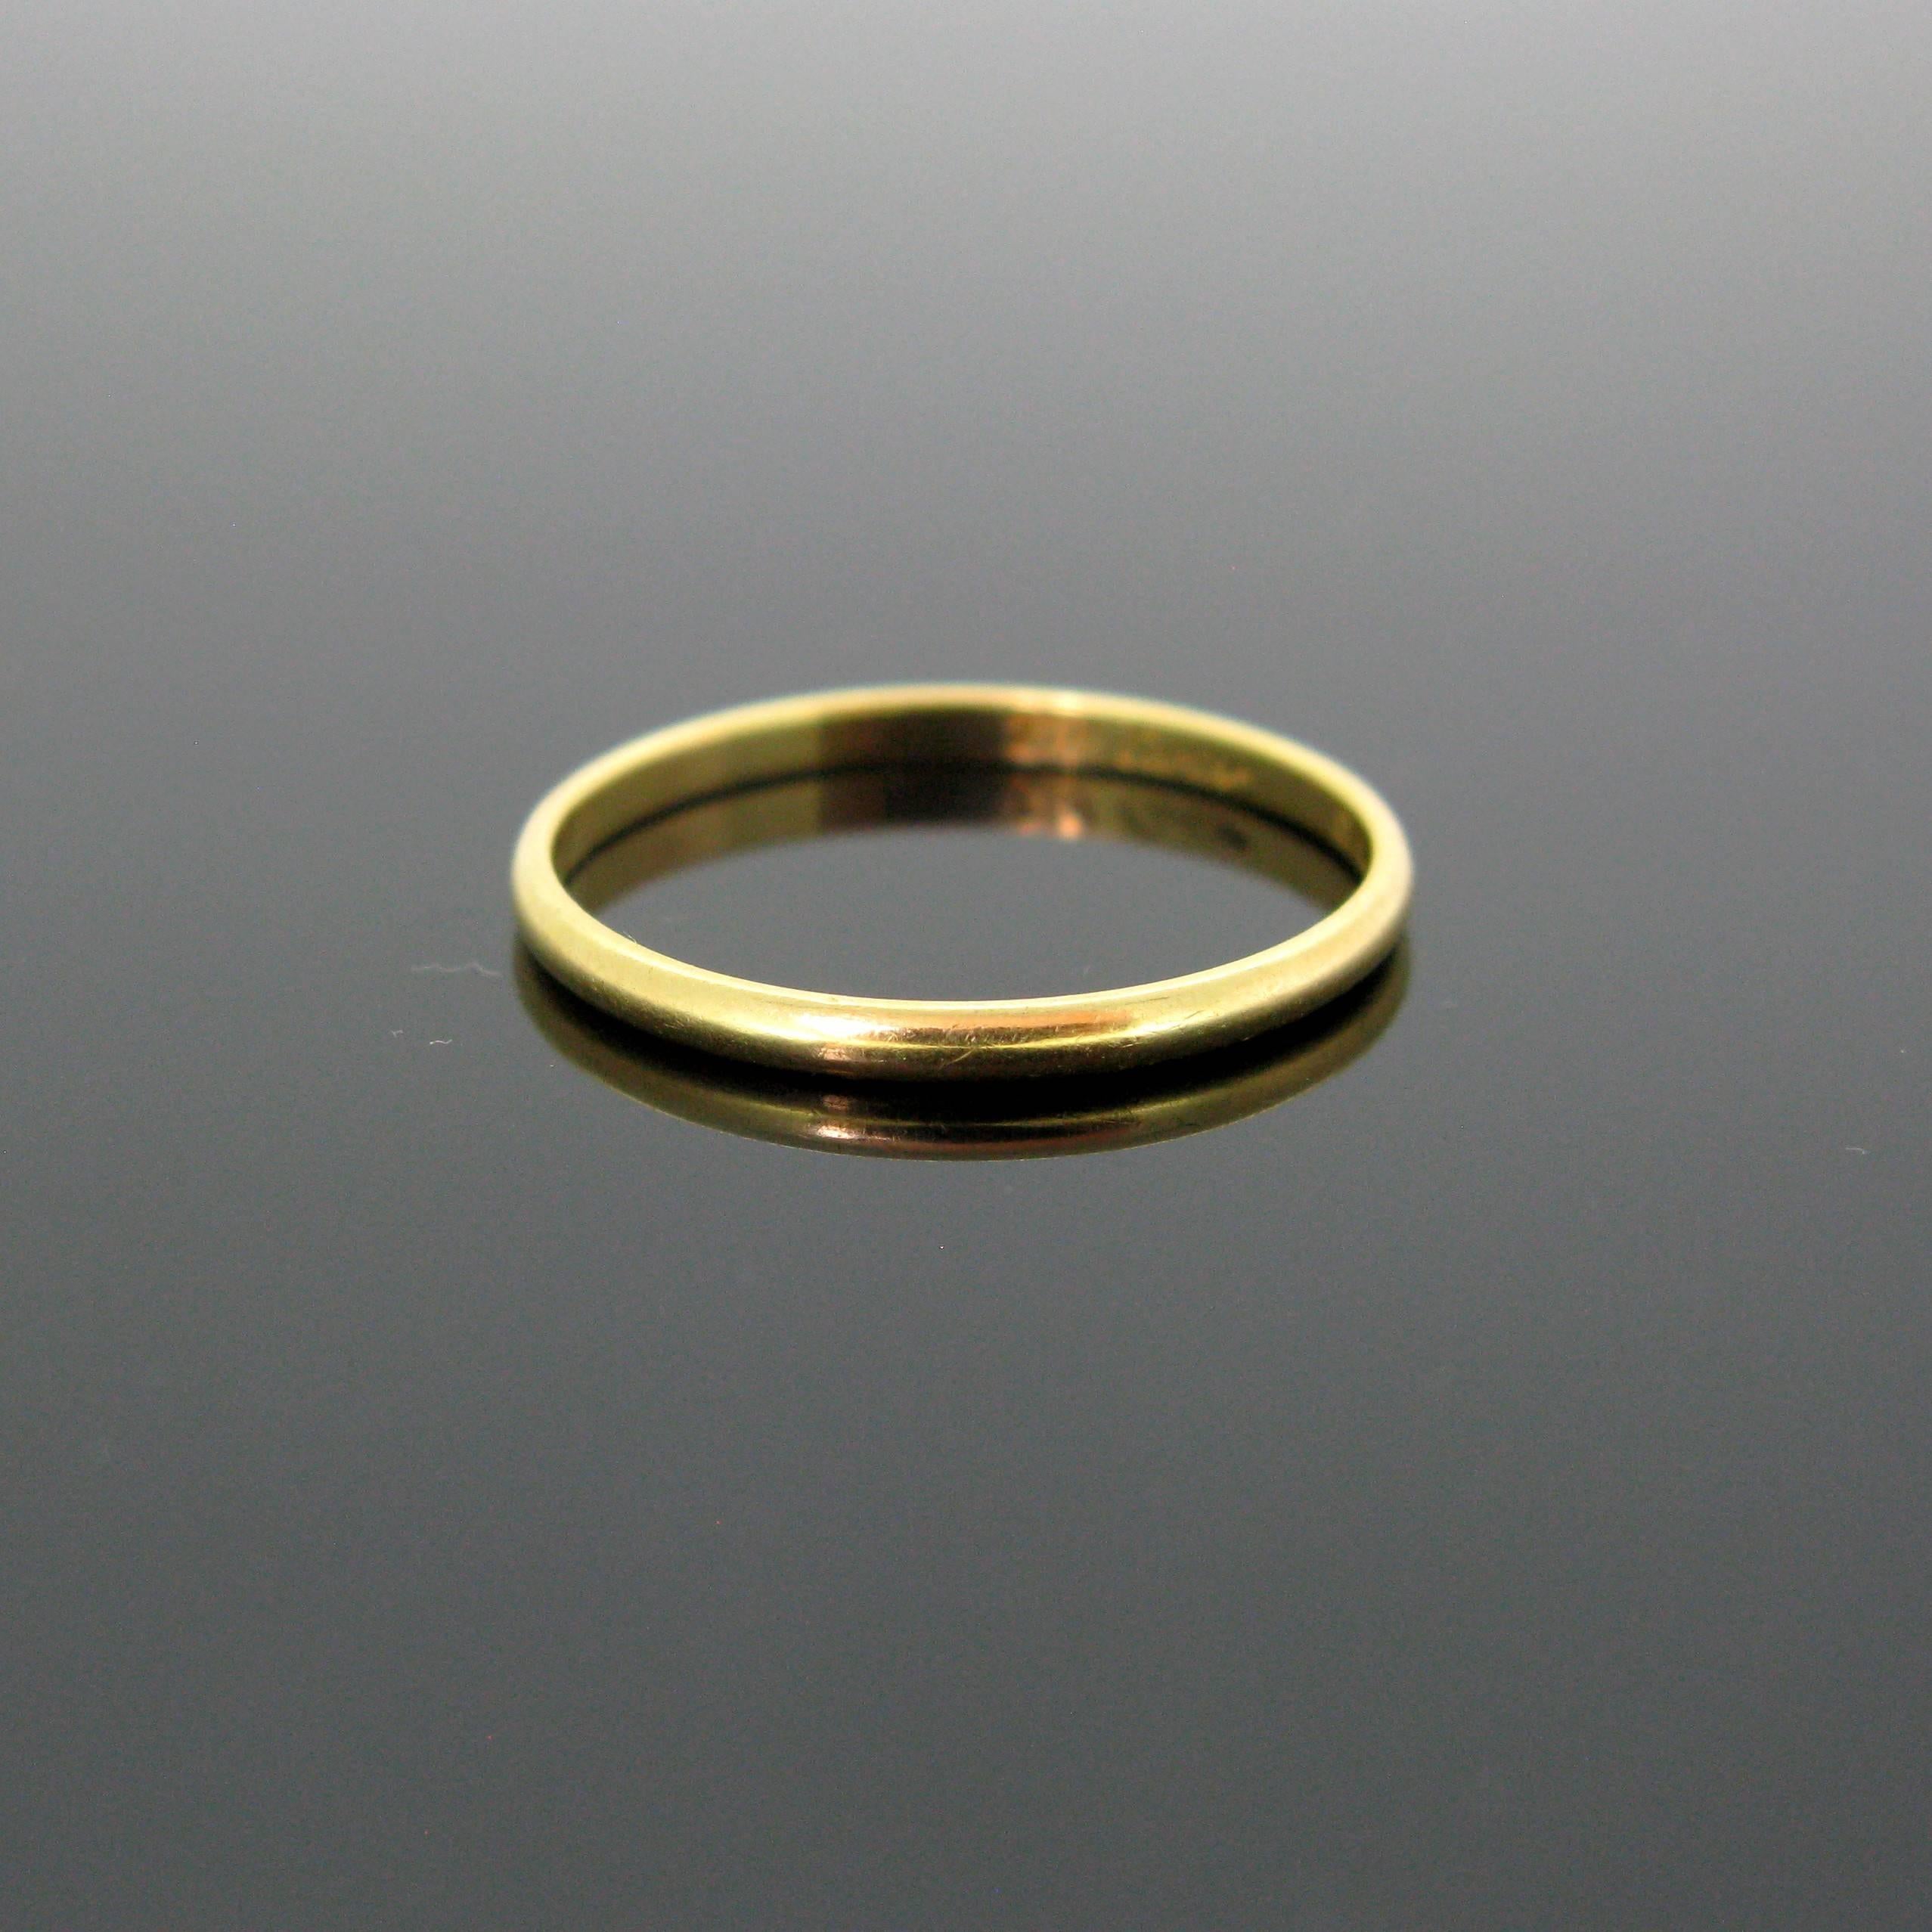 This vintage wedding ring from Cartier is made in 18kt yellow gold. It is a classic wedding band numbered 61 985619. If you are after a classic elegant and chic look for your wedding band then this is for you. It can also easily be stacked with